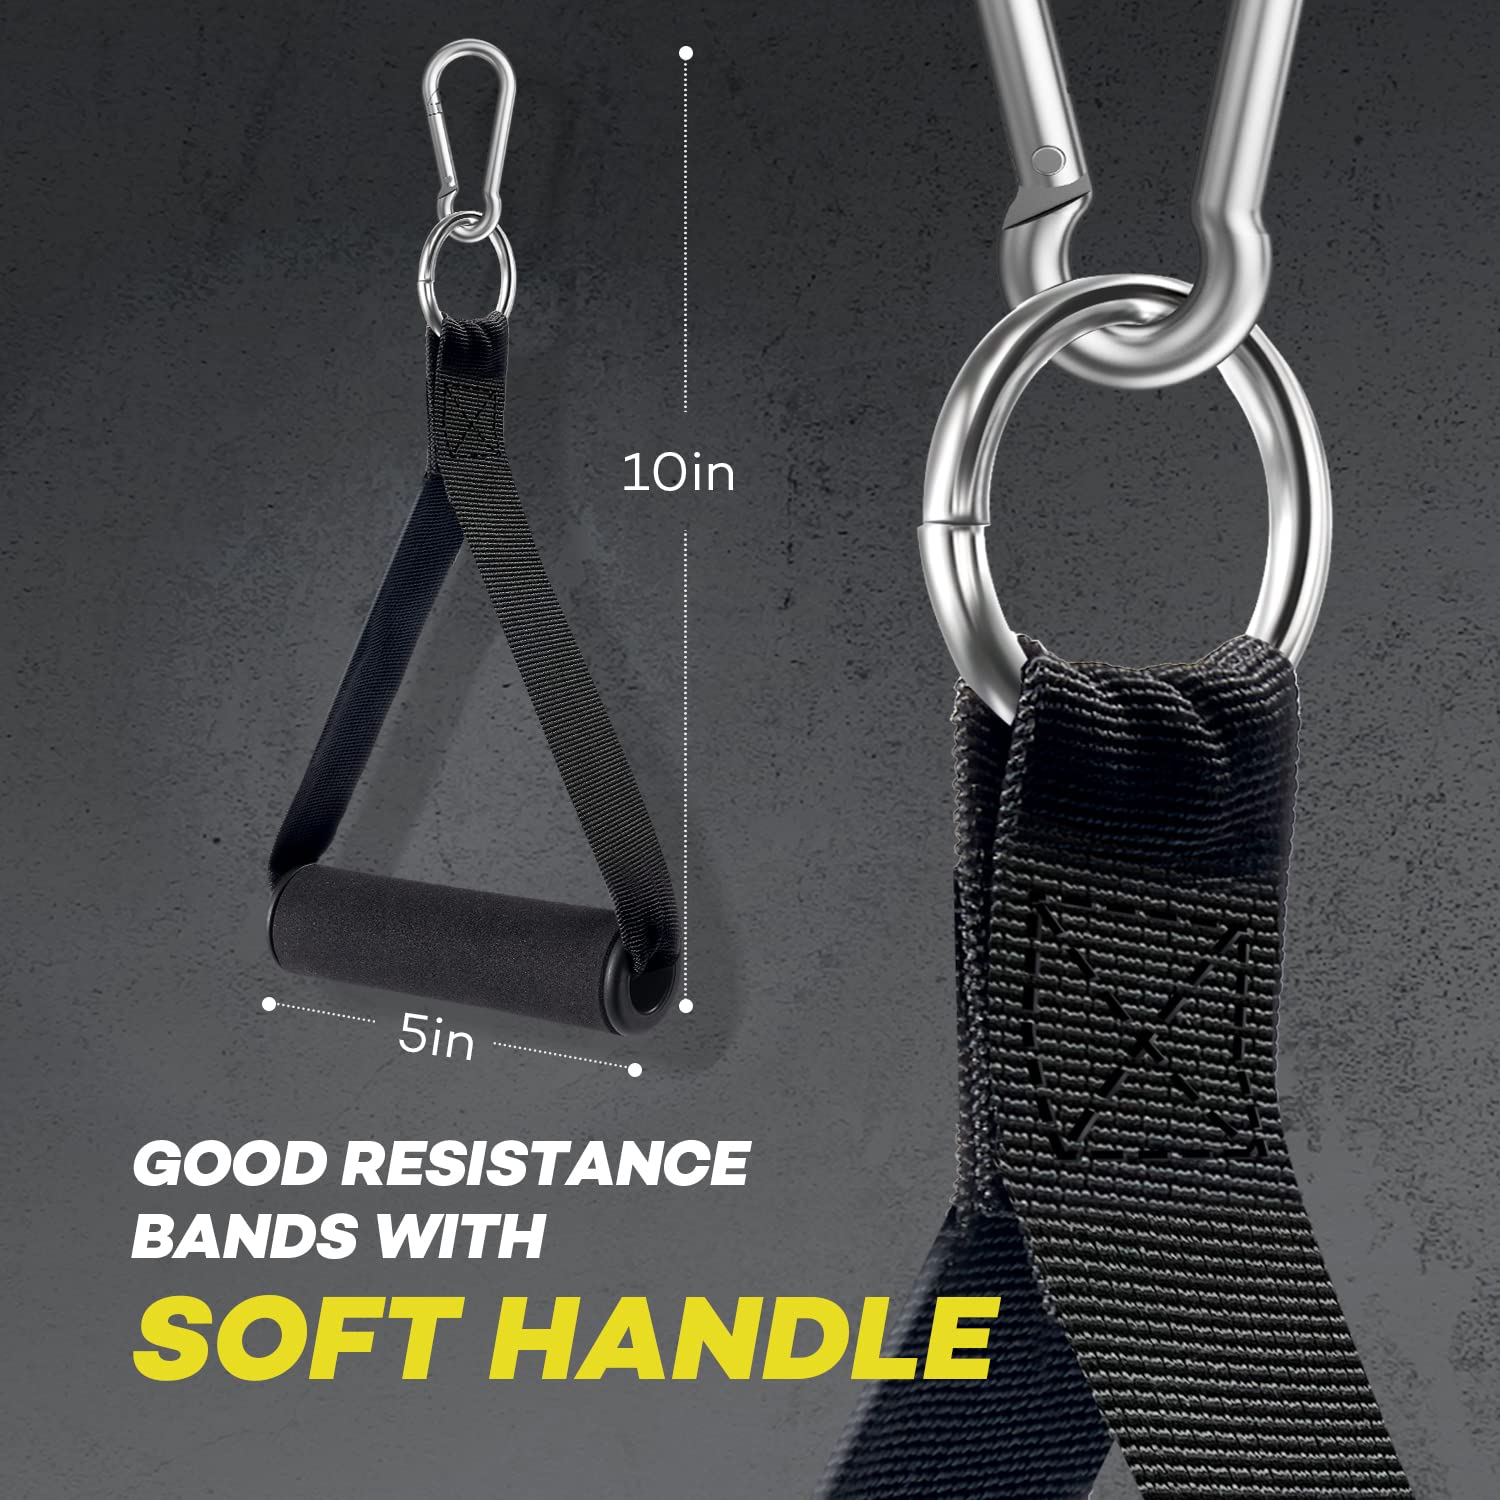 Heavy Resistance Bands for Working Out 240lbs, NITEEN Resistance Bands with Handles Weight Exercise Bands for Men Women,Workout Bands with Door Anchor and Ankle Straps Strength Training Equipment